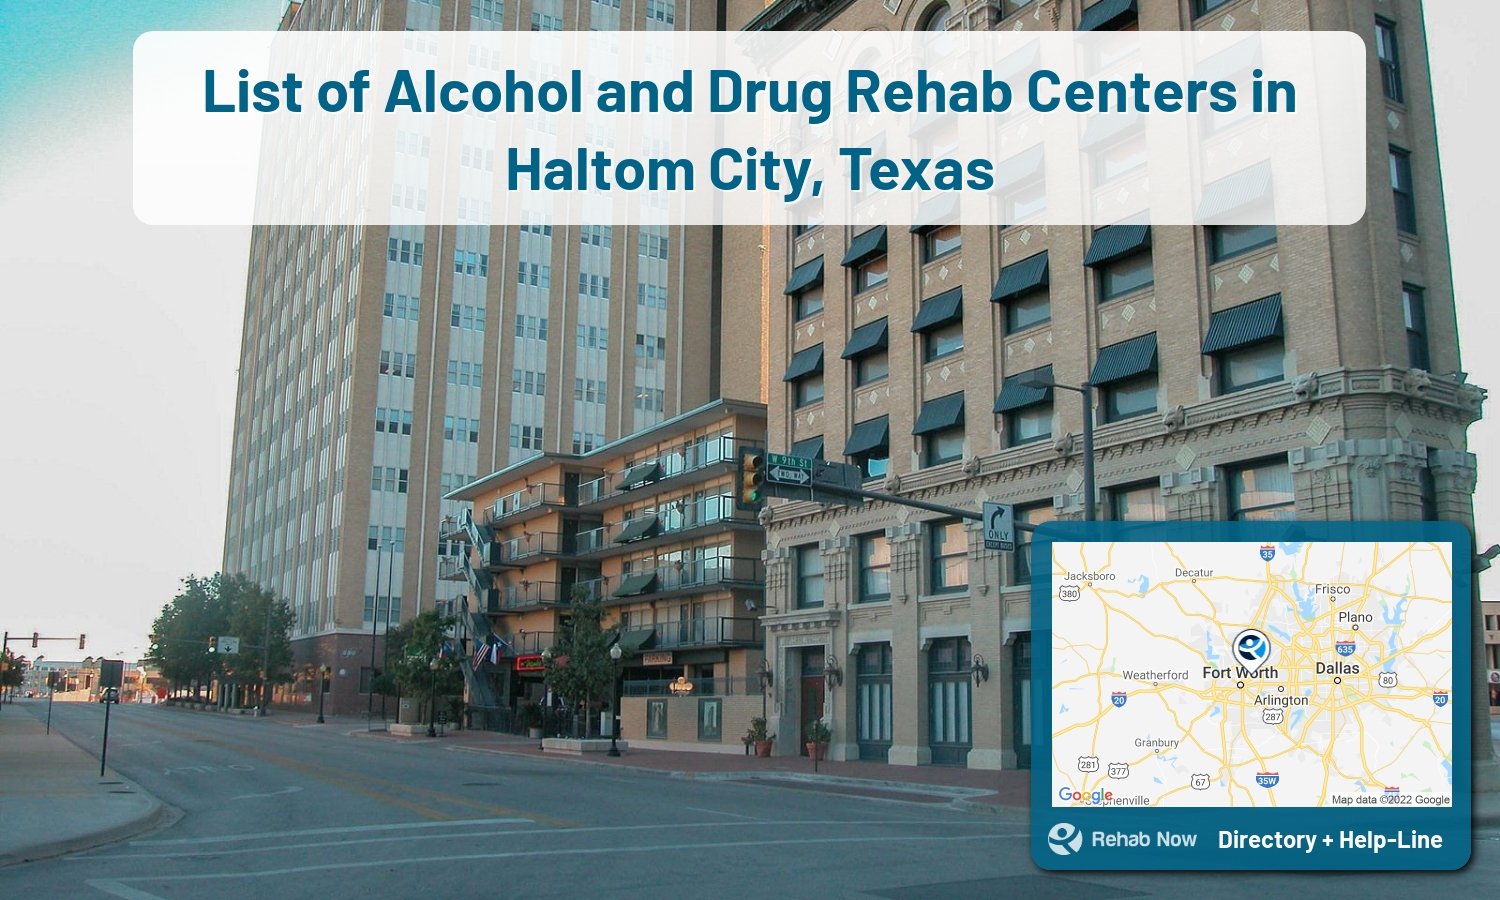 View options, availability, treatment methods, and more, for drug rehab and alcohol treatment in Haltom City, Texas